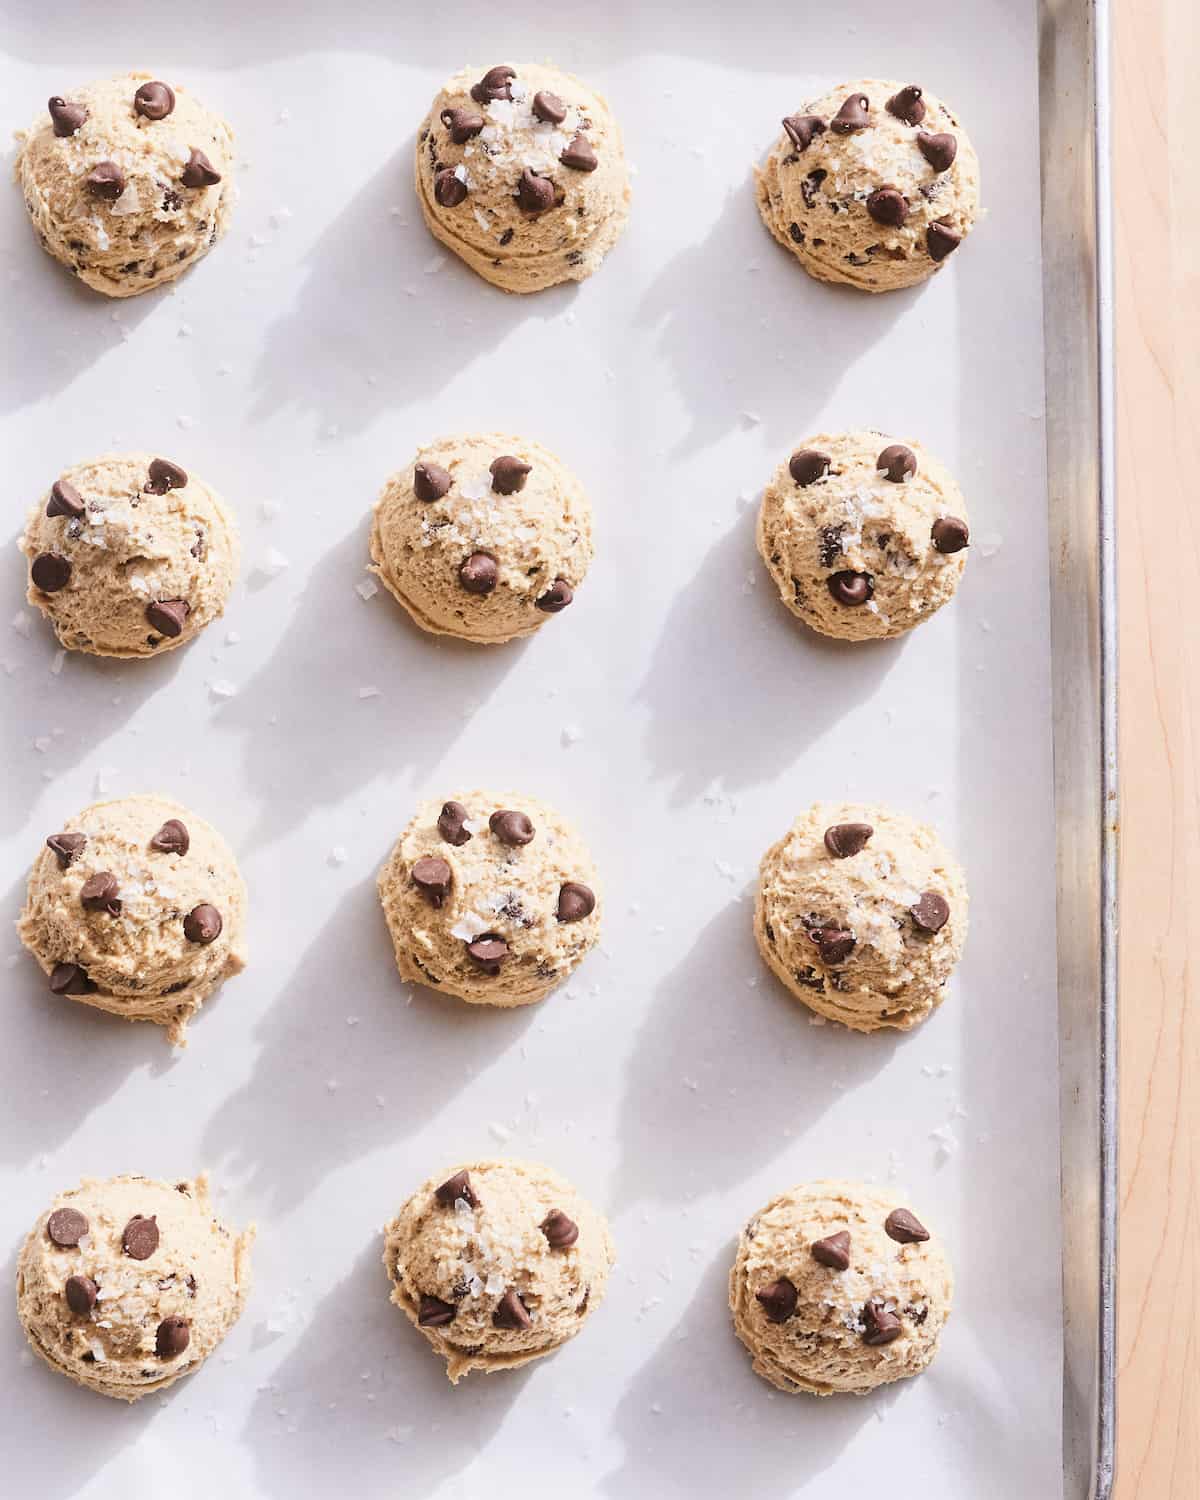 Unbaked Chocolate Chip Cookies on a baking sheet lined with parchment